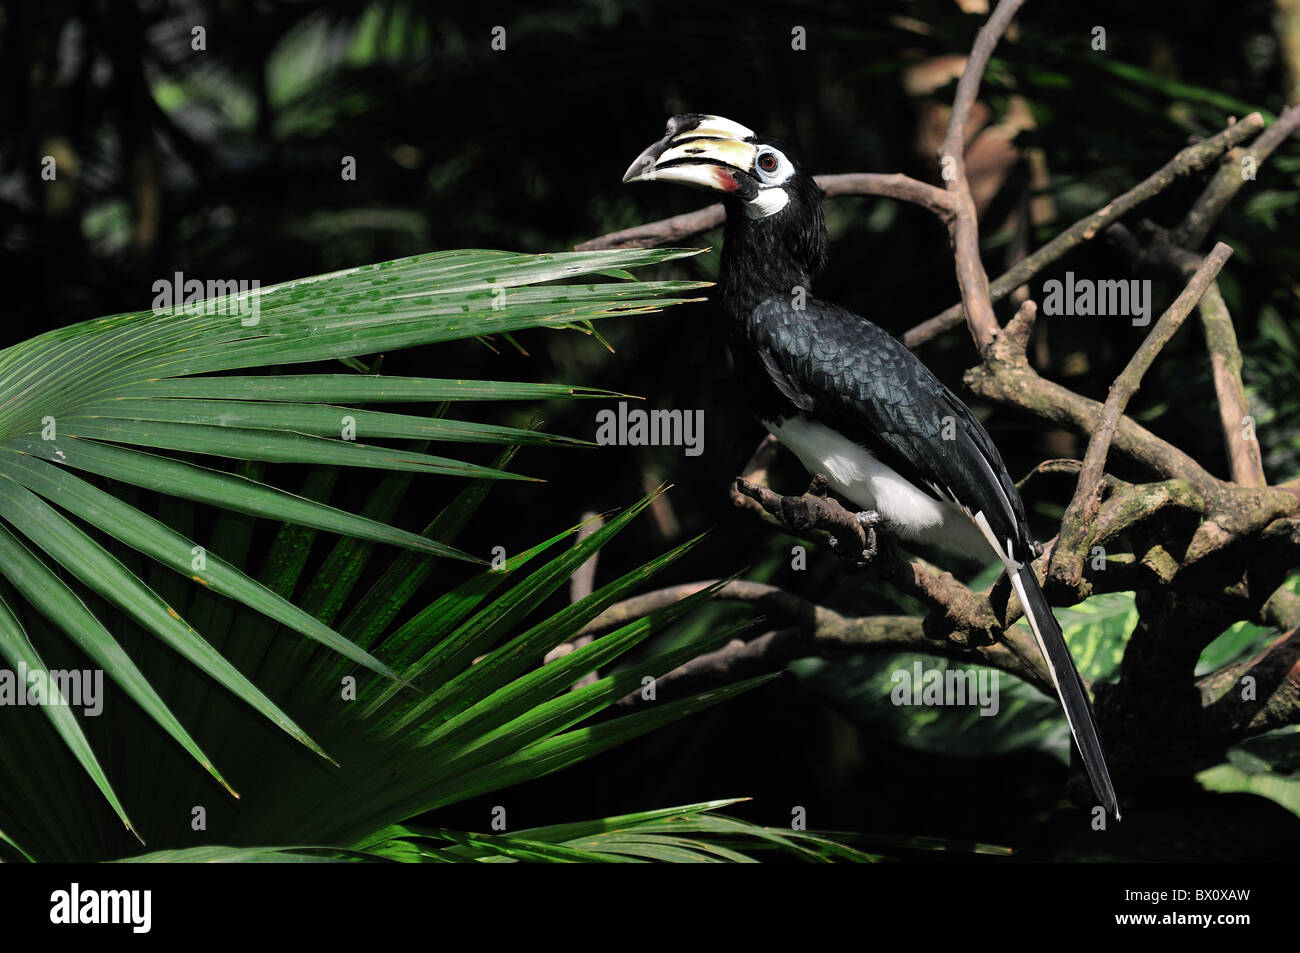 Oriental Pied Hornbill Anthracoceros albirostris. Bucerotidae family. It is found in East Asia. Stock Photo